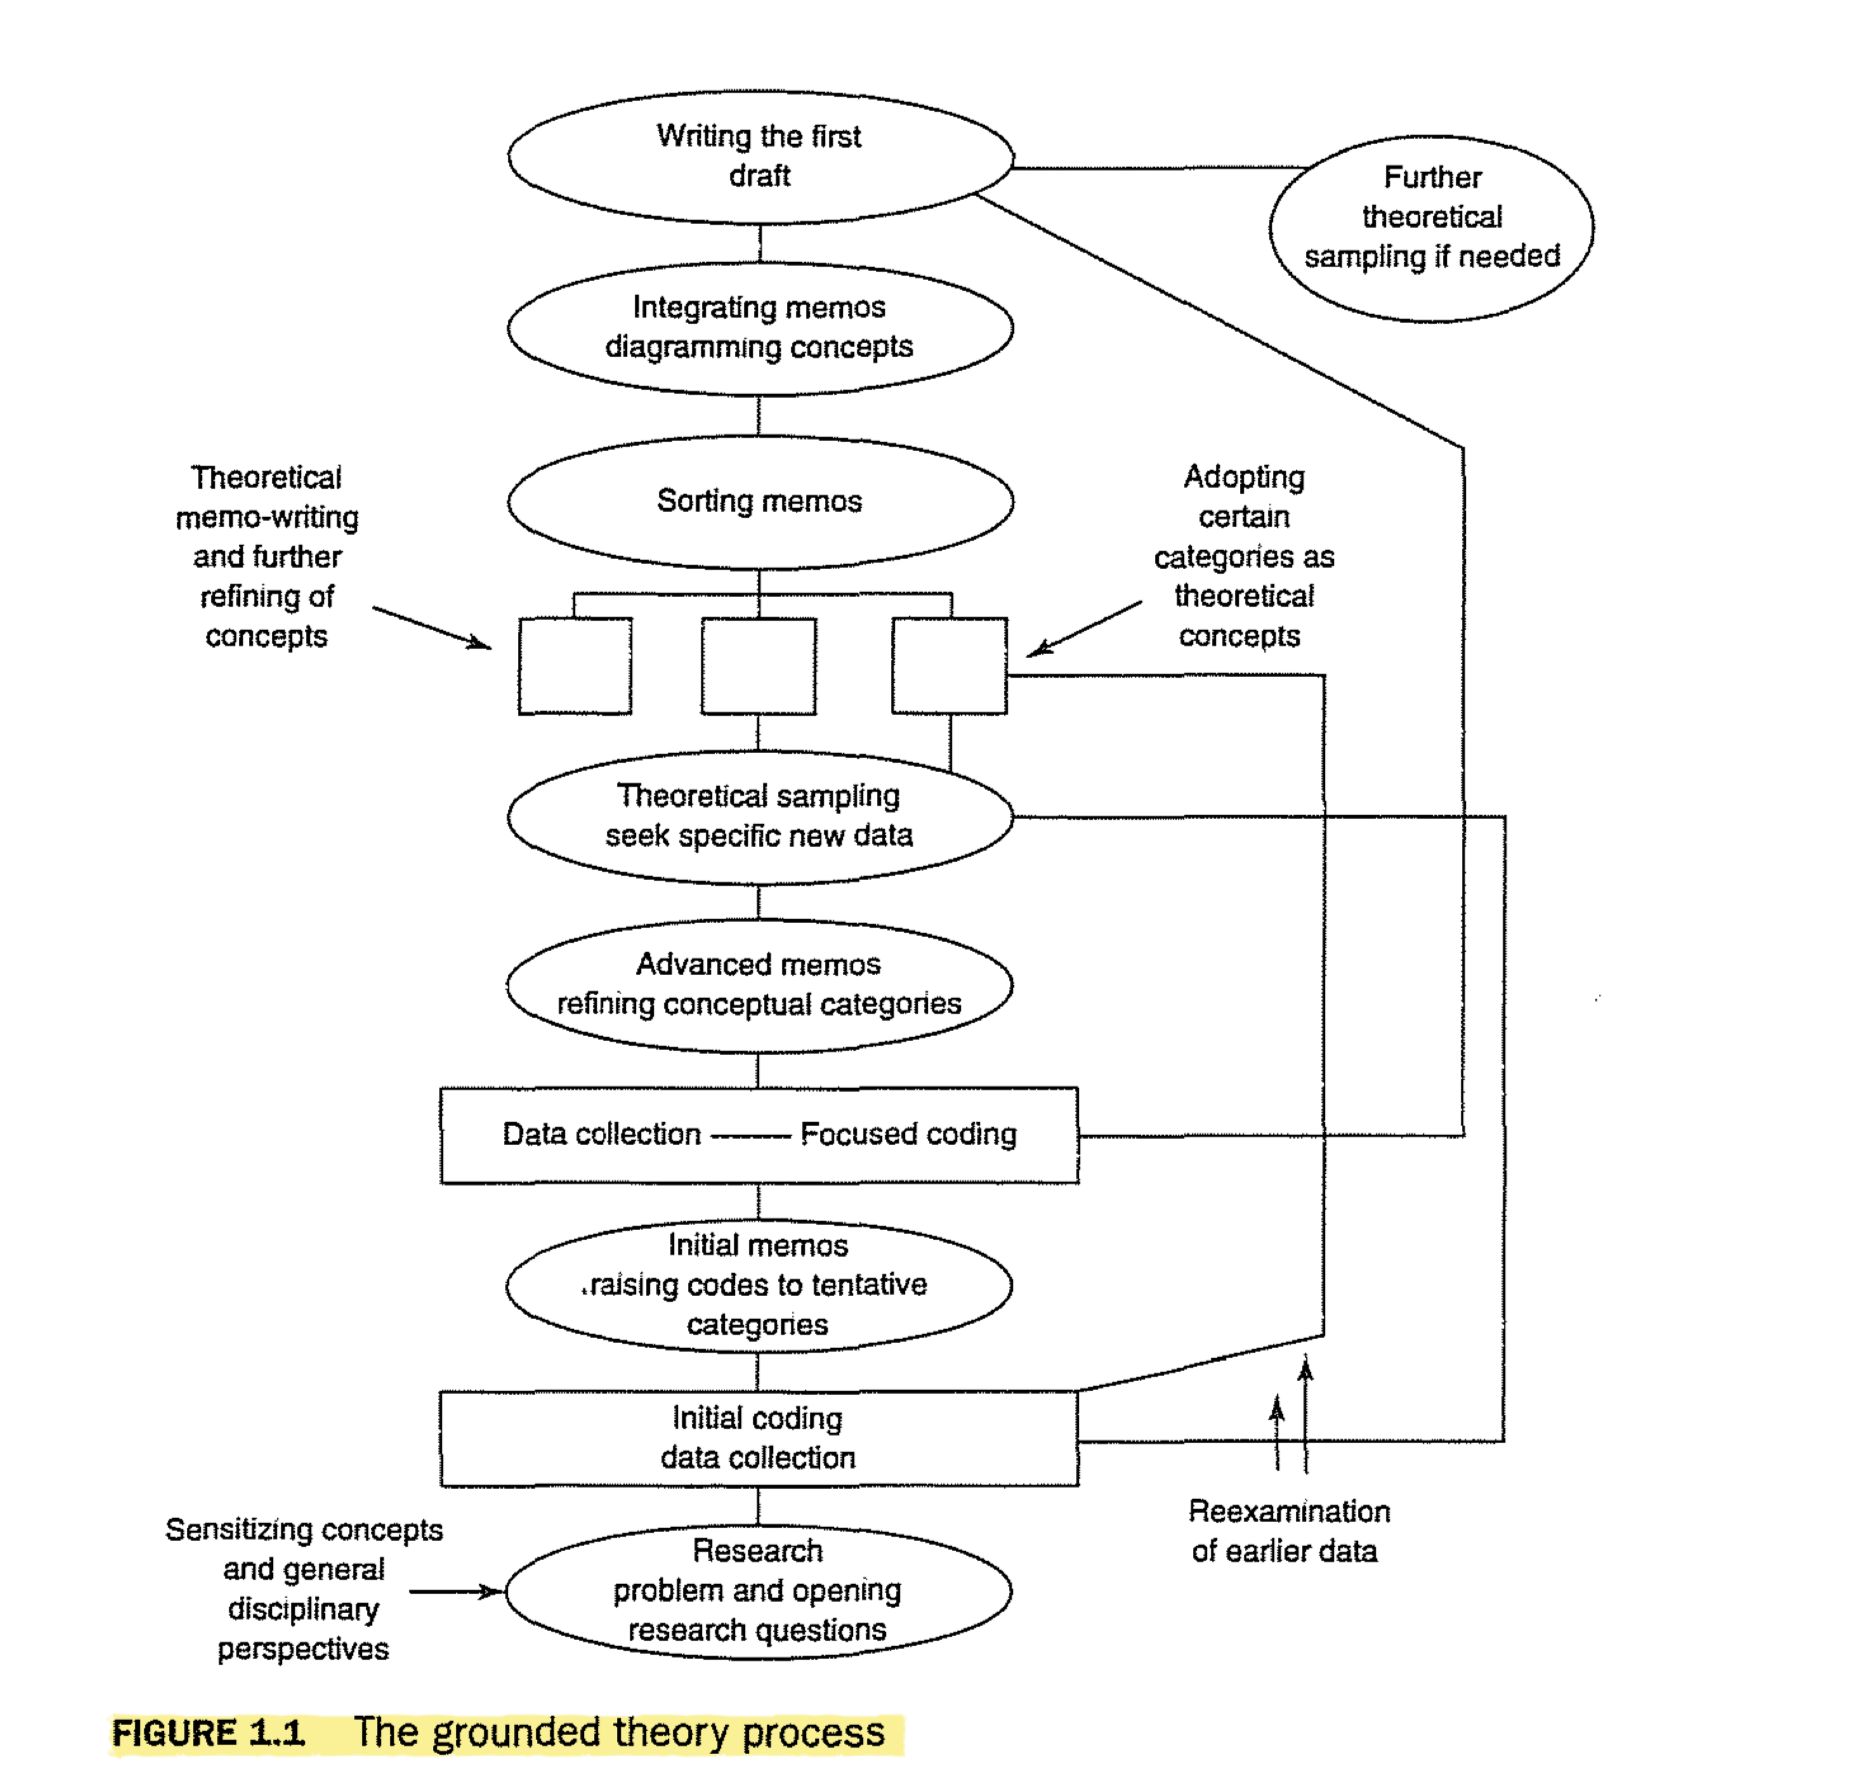 Charmaz’s (2006) Grounded Theory Process.